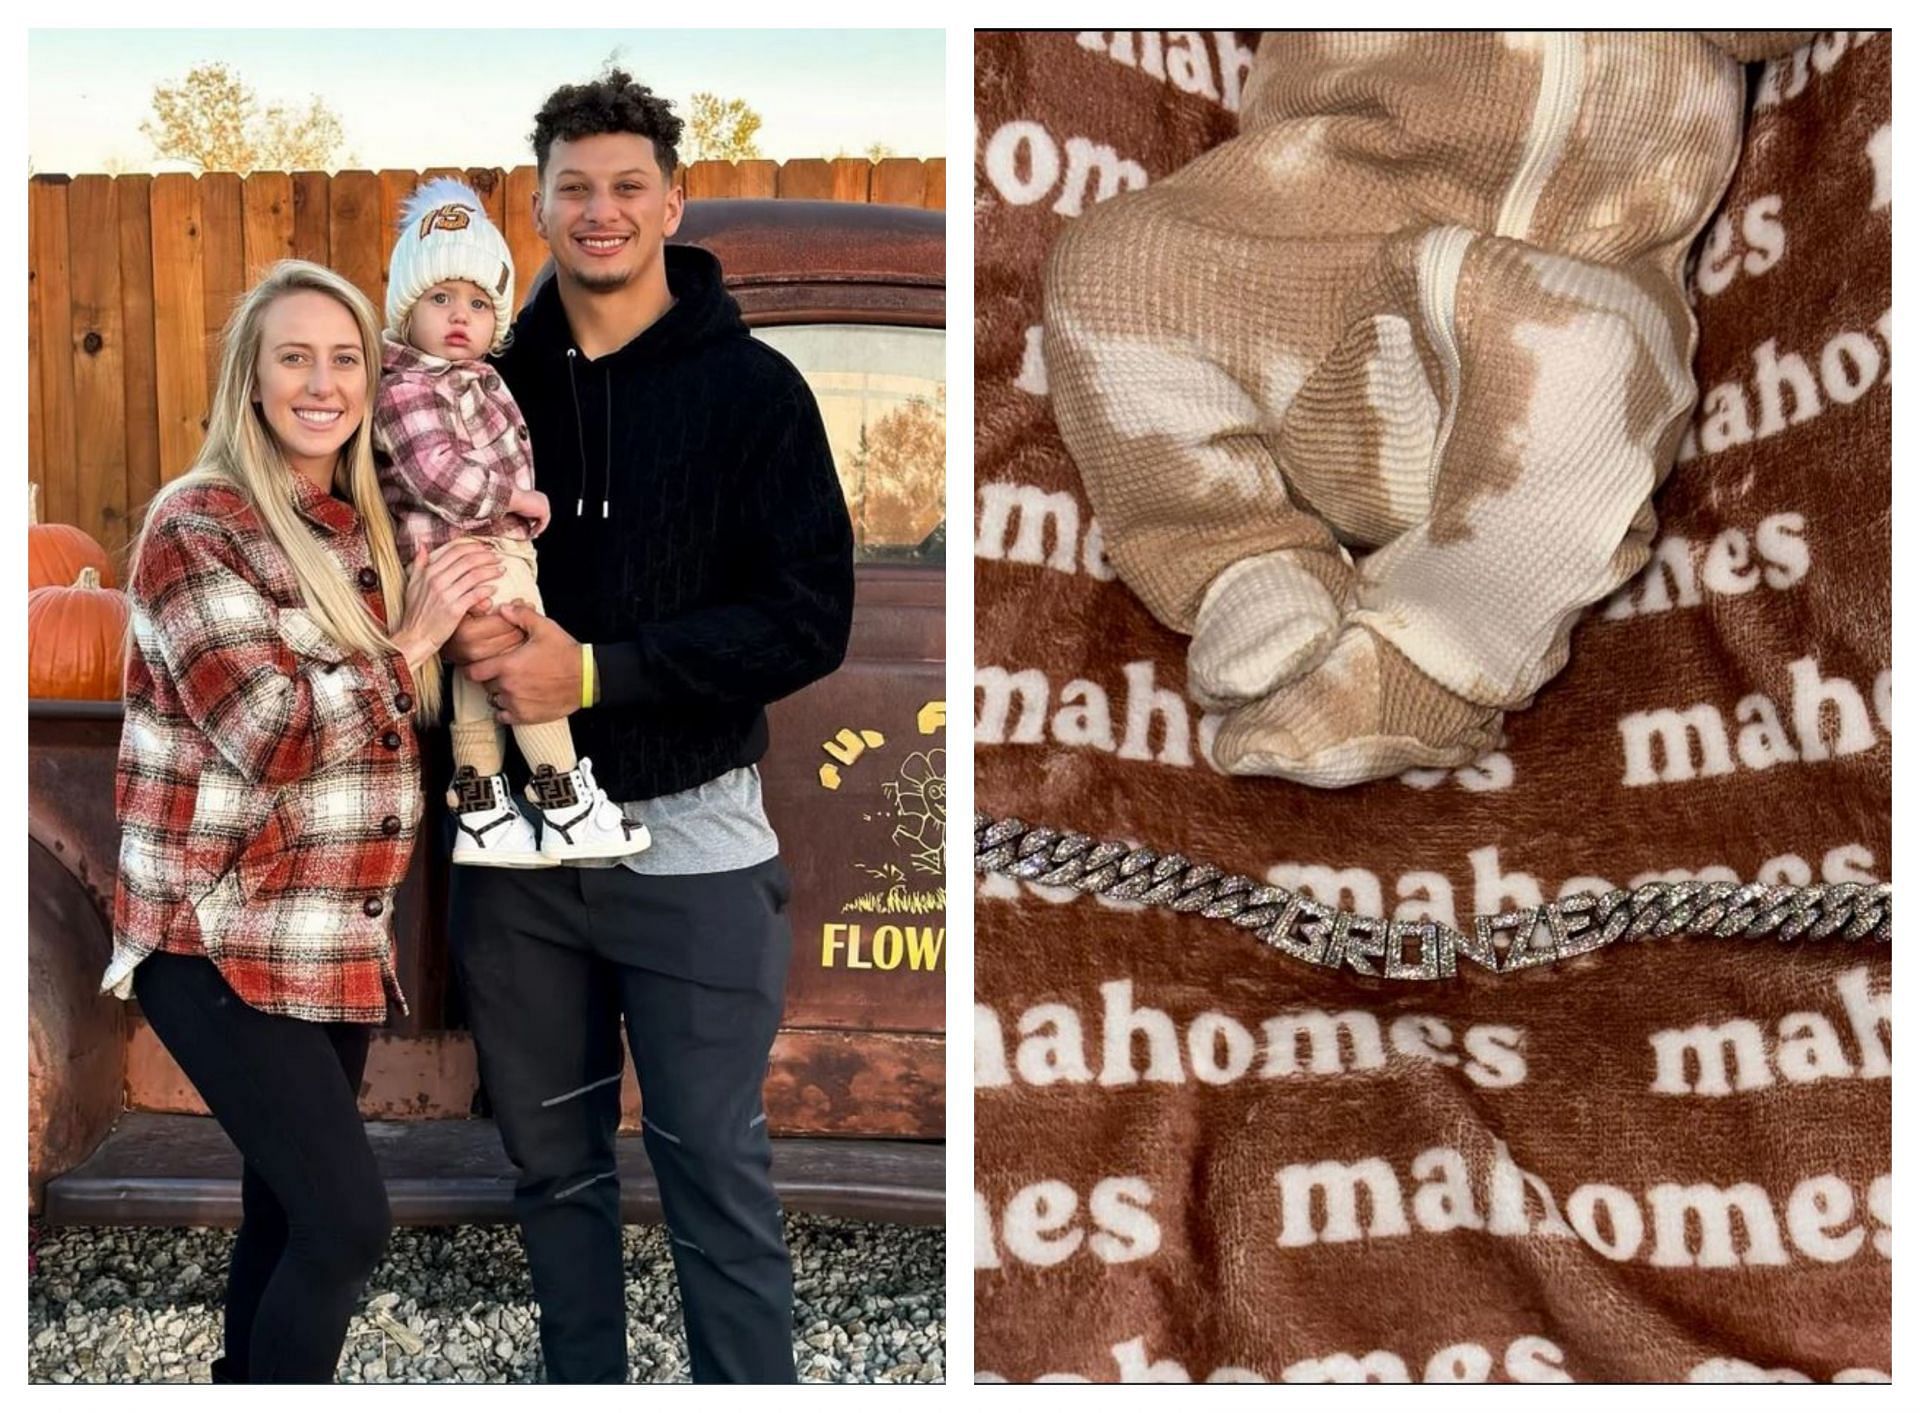 Mahomes family ready for baby: New photos with Patrick and Brittany, News